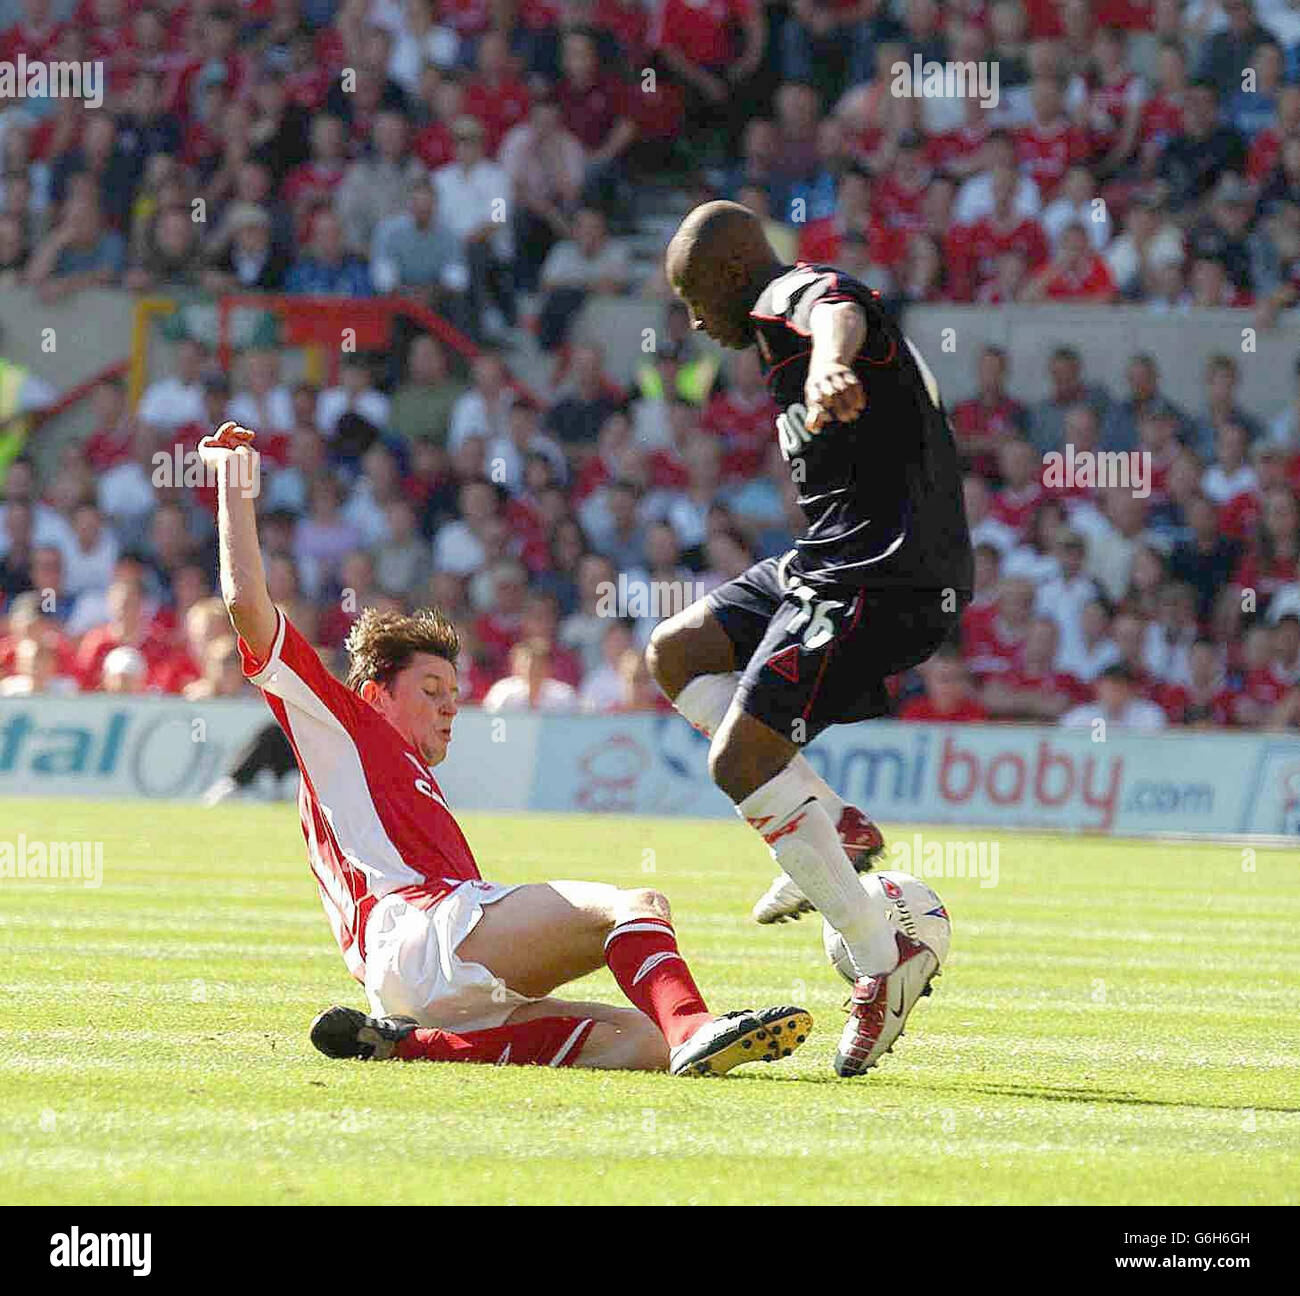 Notts Forest's Danny Sonner make's a lunge on Sheffield Utd's Peter Ndlovu, during their Nationwide Division One match at the City Ground, Nottingham. NO UNOFFICIAL CLUB WEBSITE USE. Stock Photo